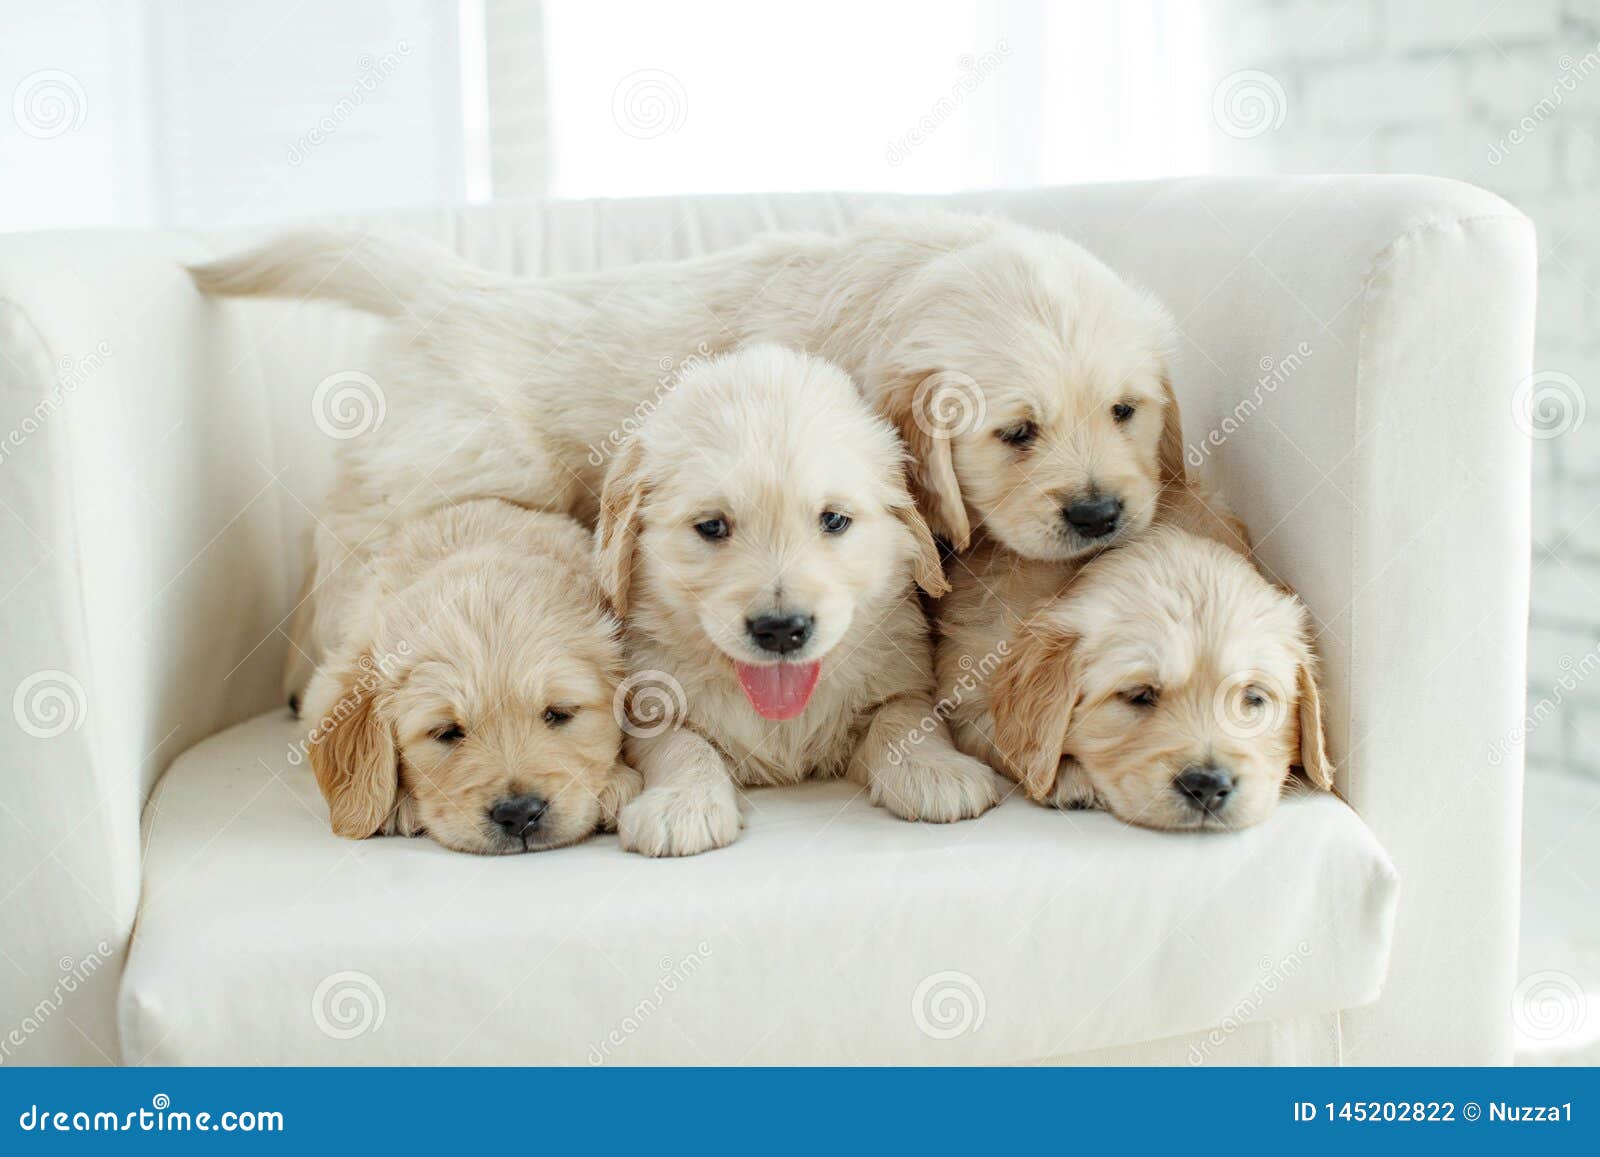 Little Labrador Puppies At Home On The Carpet. Stock Photo ...